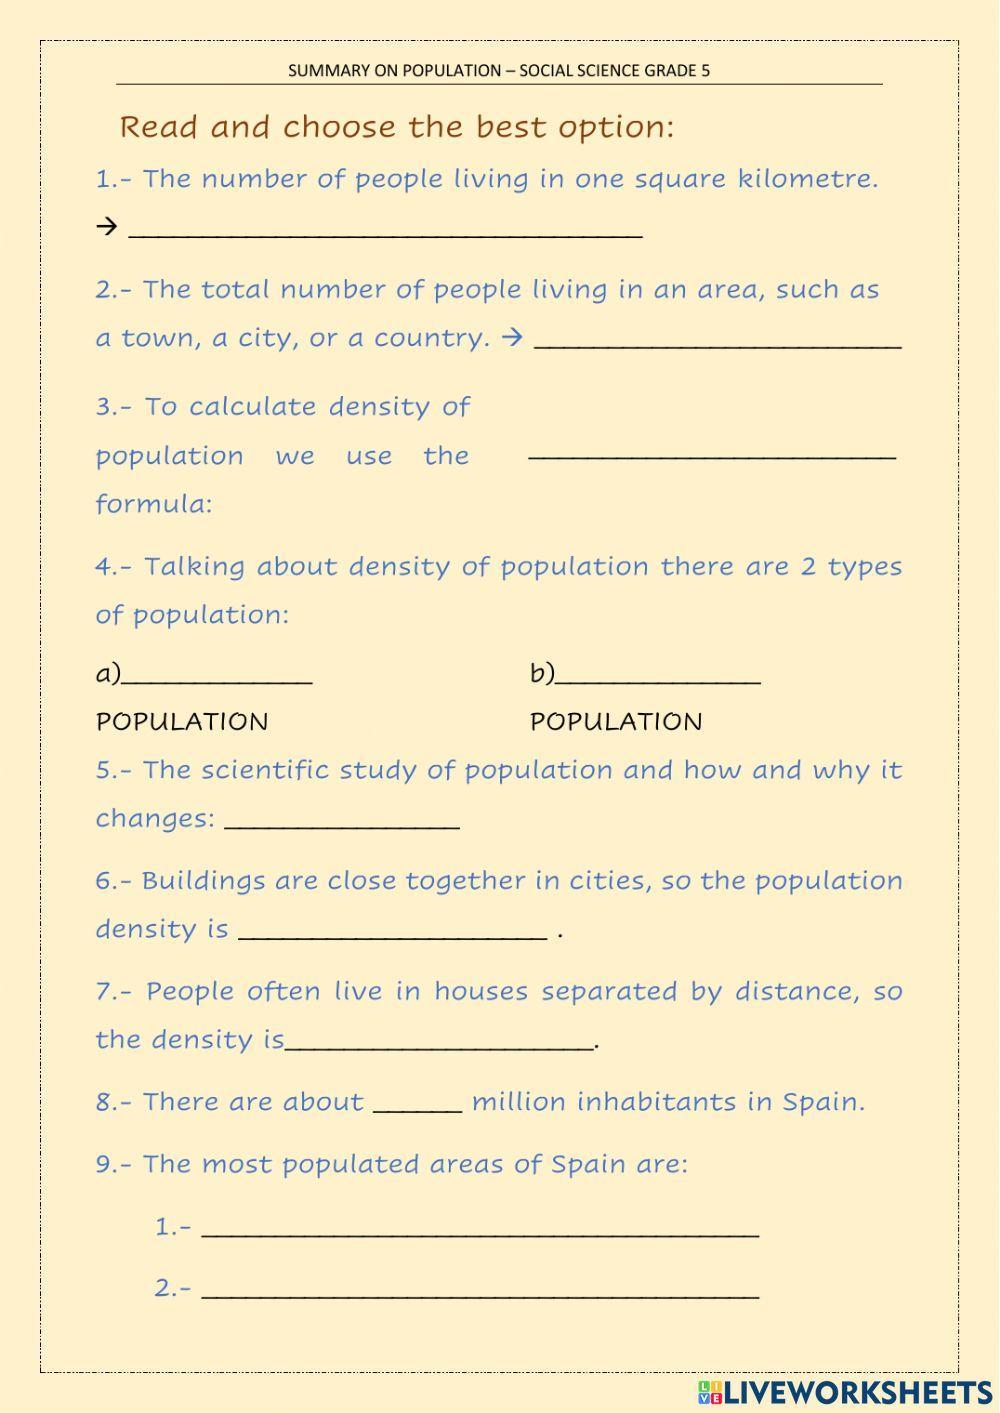 Review on Population - Spain.